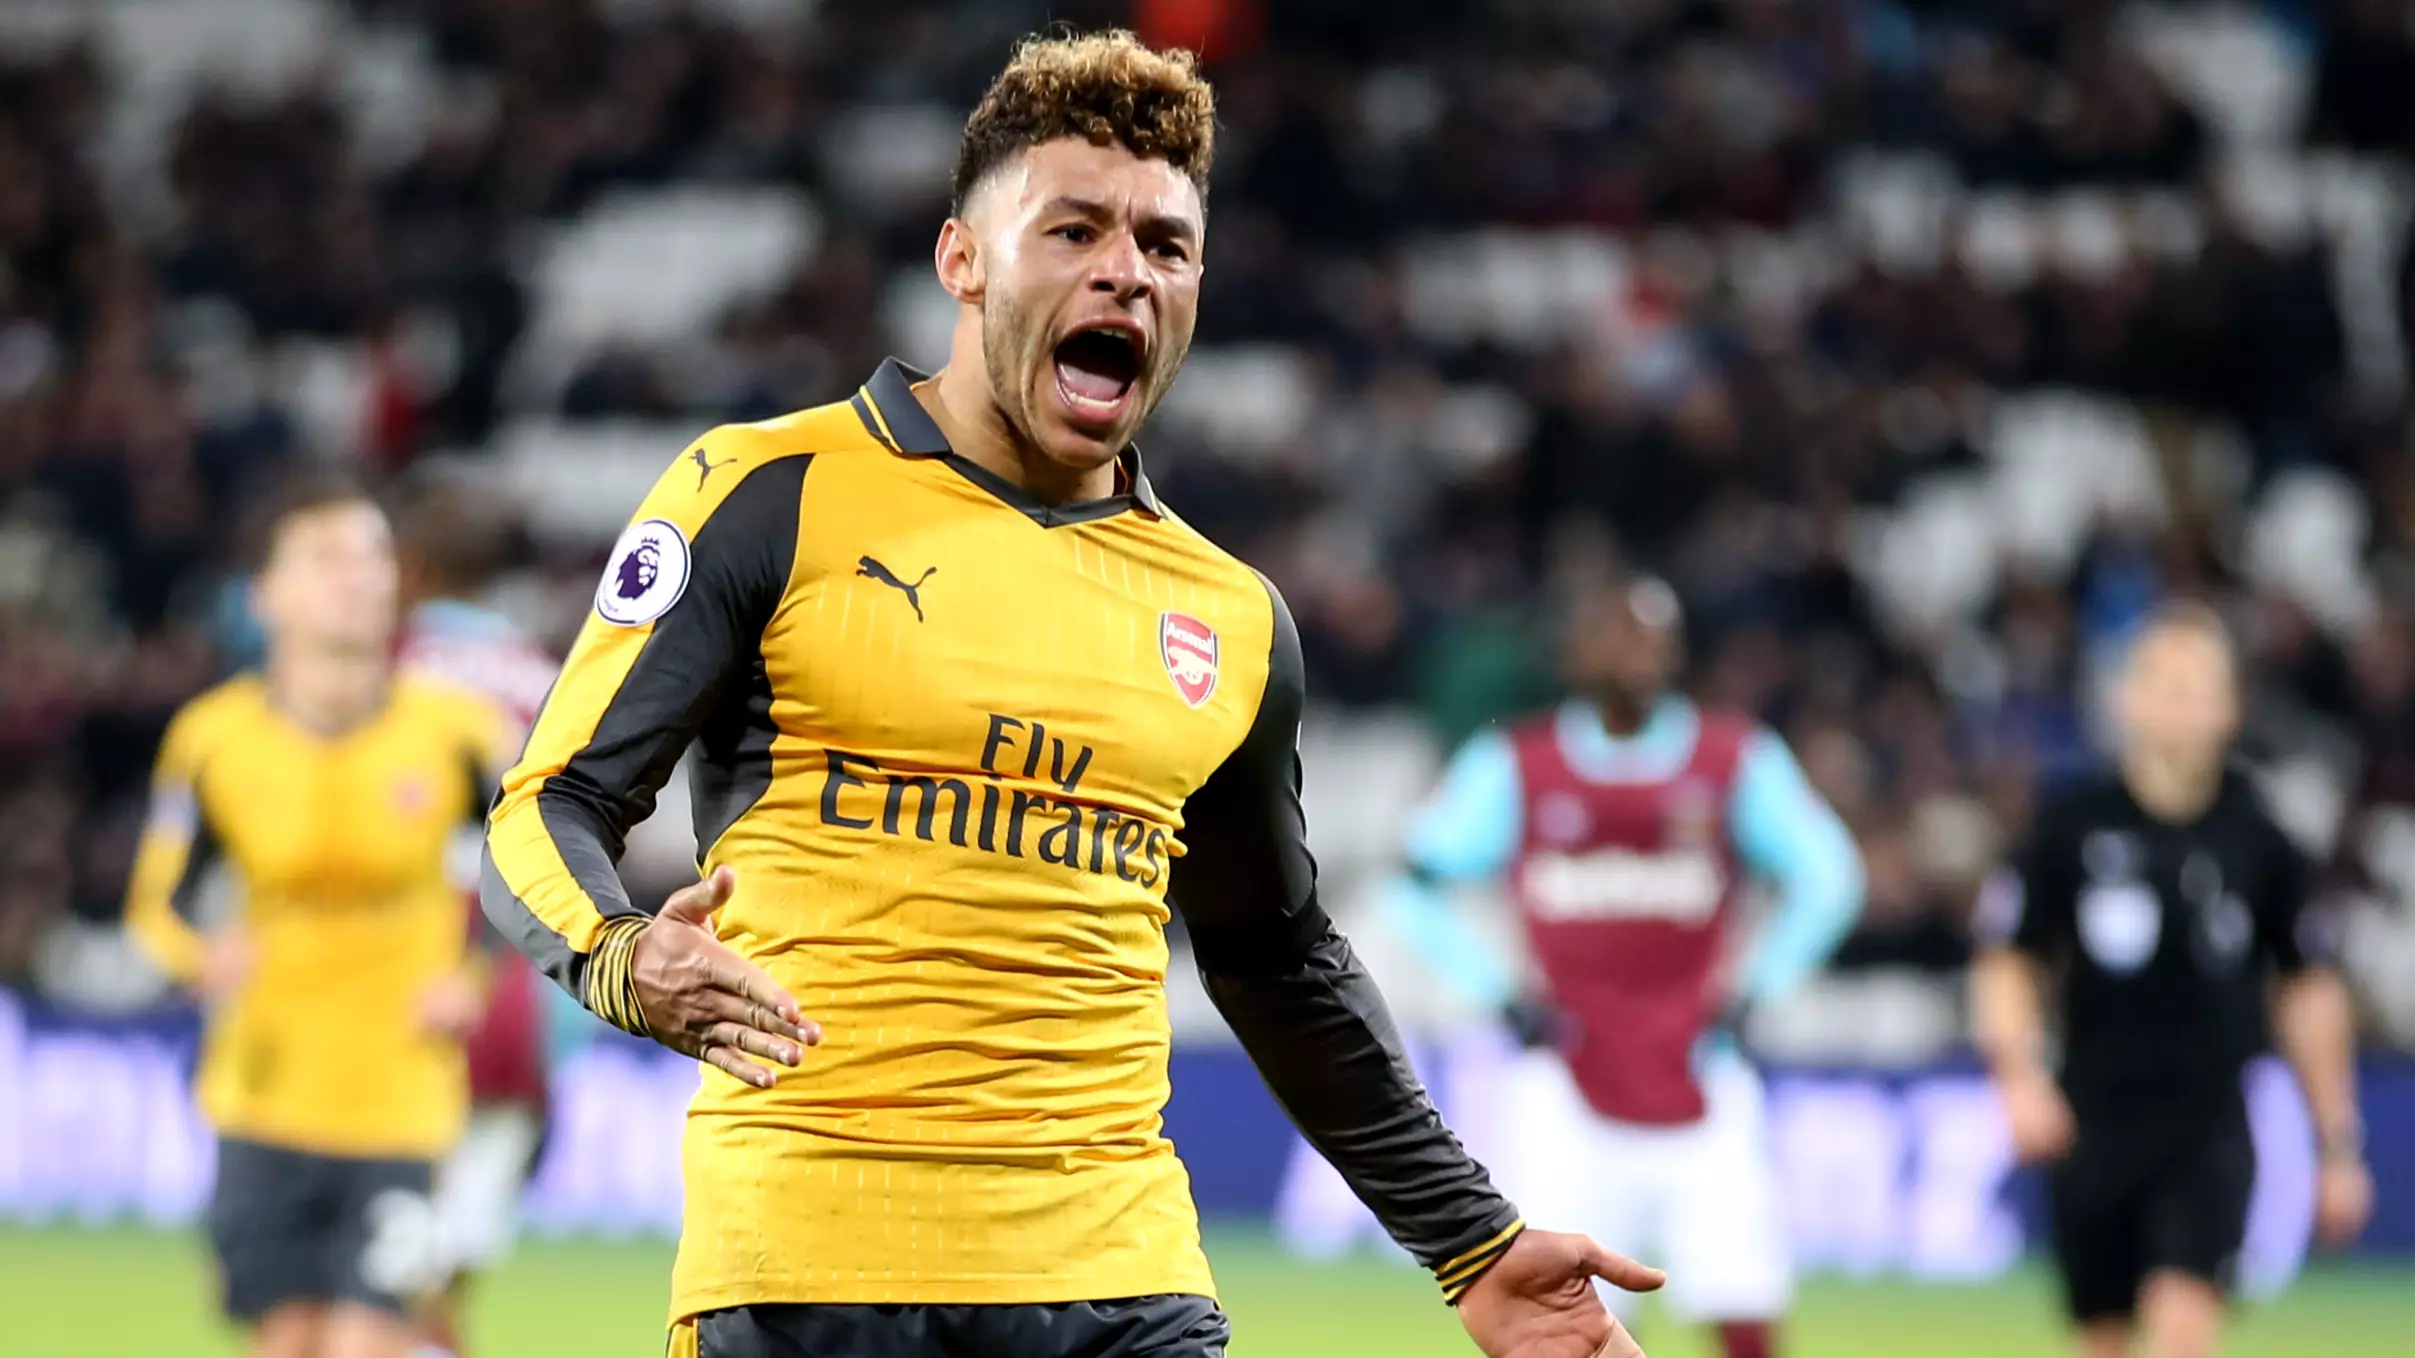 Alex Oxlade-Chamberlain Set To Become Chelsea's Highest Earner